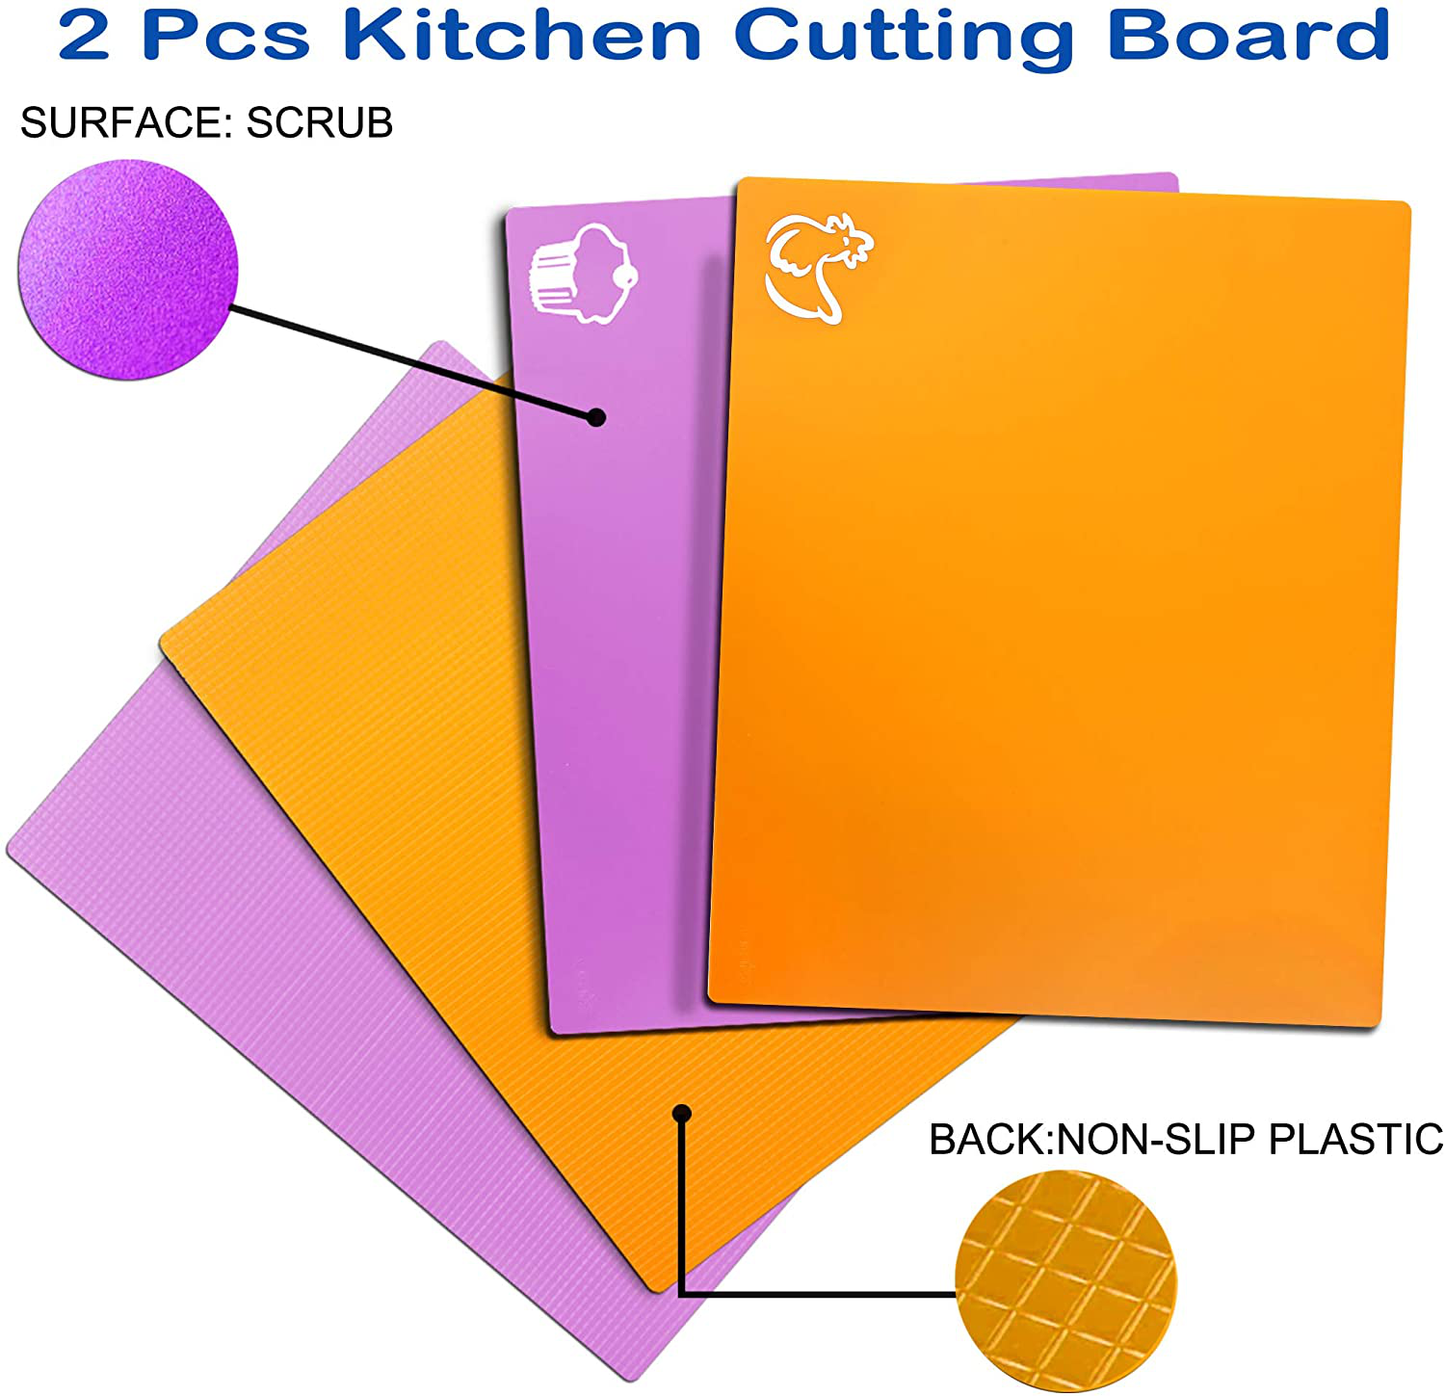 Flexible Plastic Kitchen Cutting Board Mats Set, Dishwasher Safe, Food Icons , Textured Grip Bottom Prevents Slipping, Non-Porous Colorful, Translucent Colors(Set of 2) by Orrdice